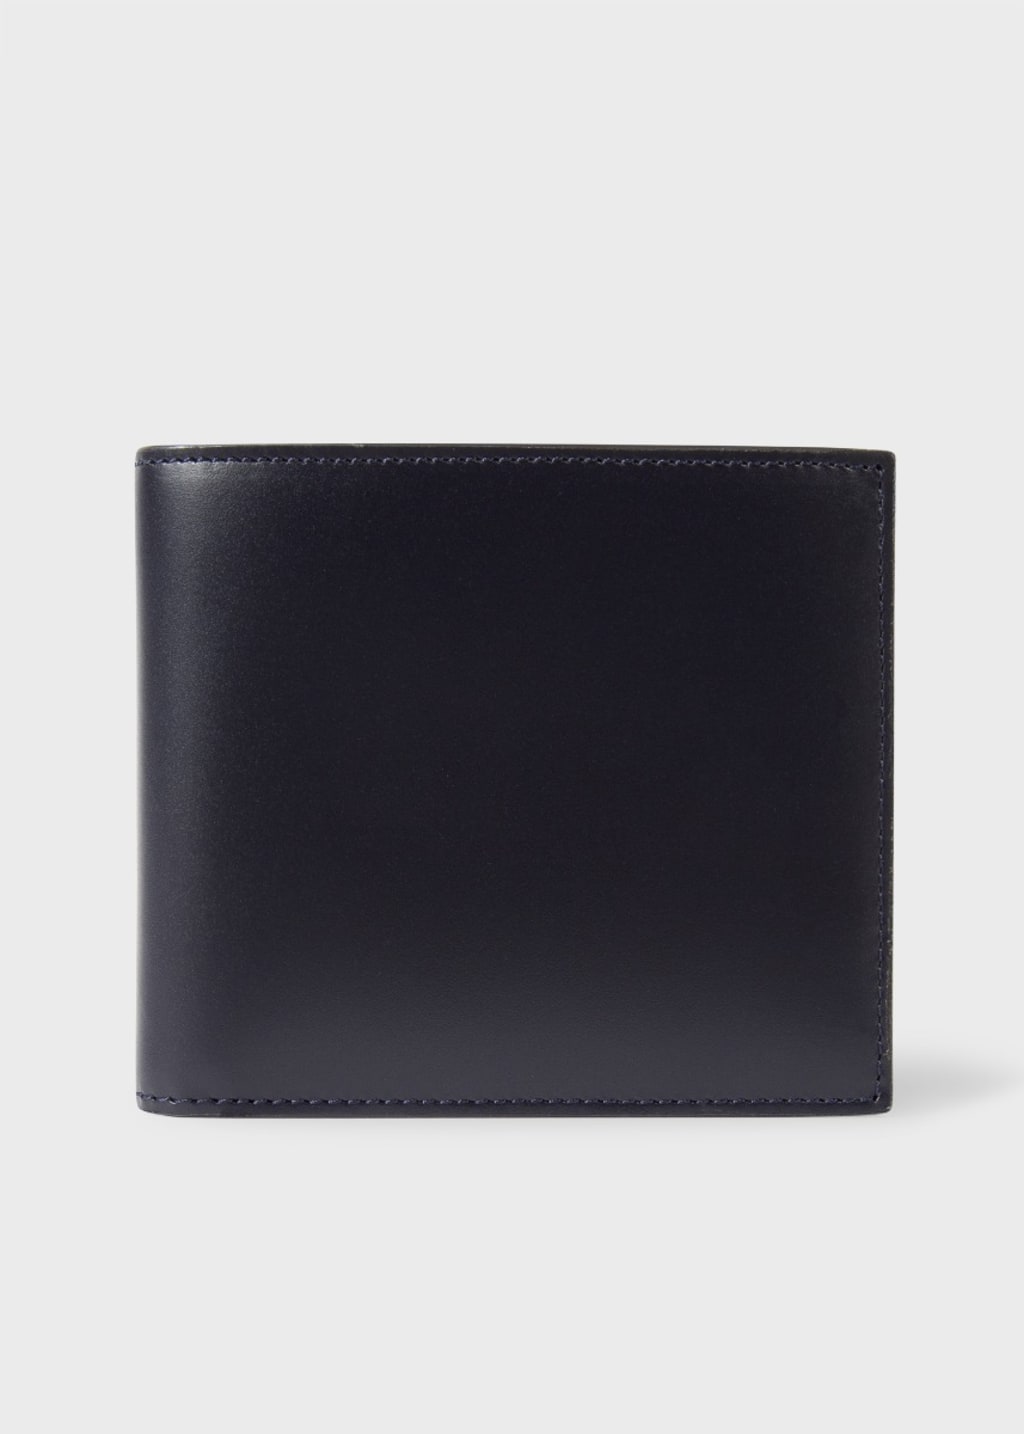 Front View - Navy Leather Monogrammed Billfold Wallet Paul Smith